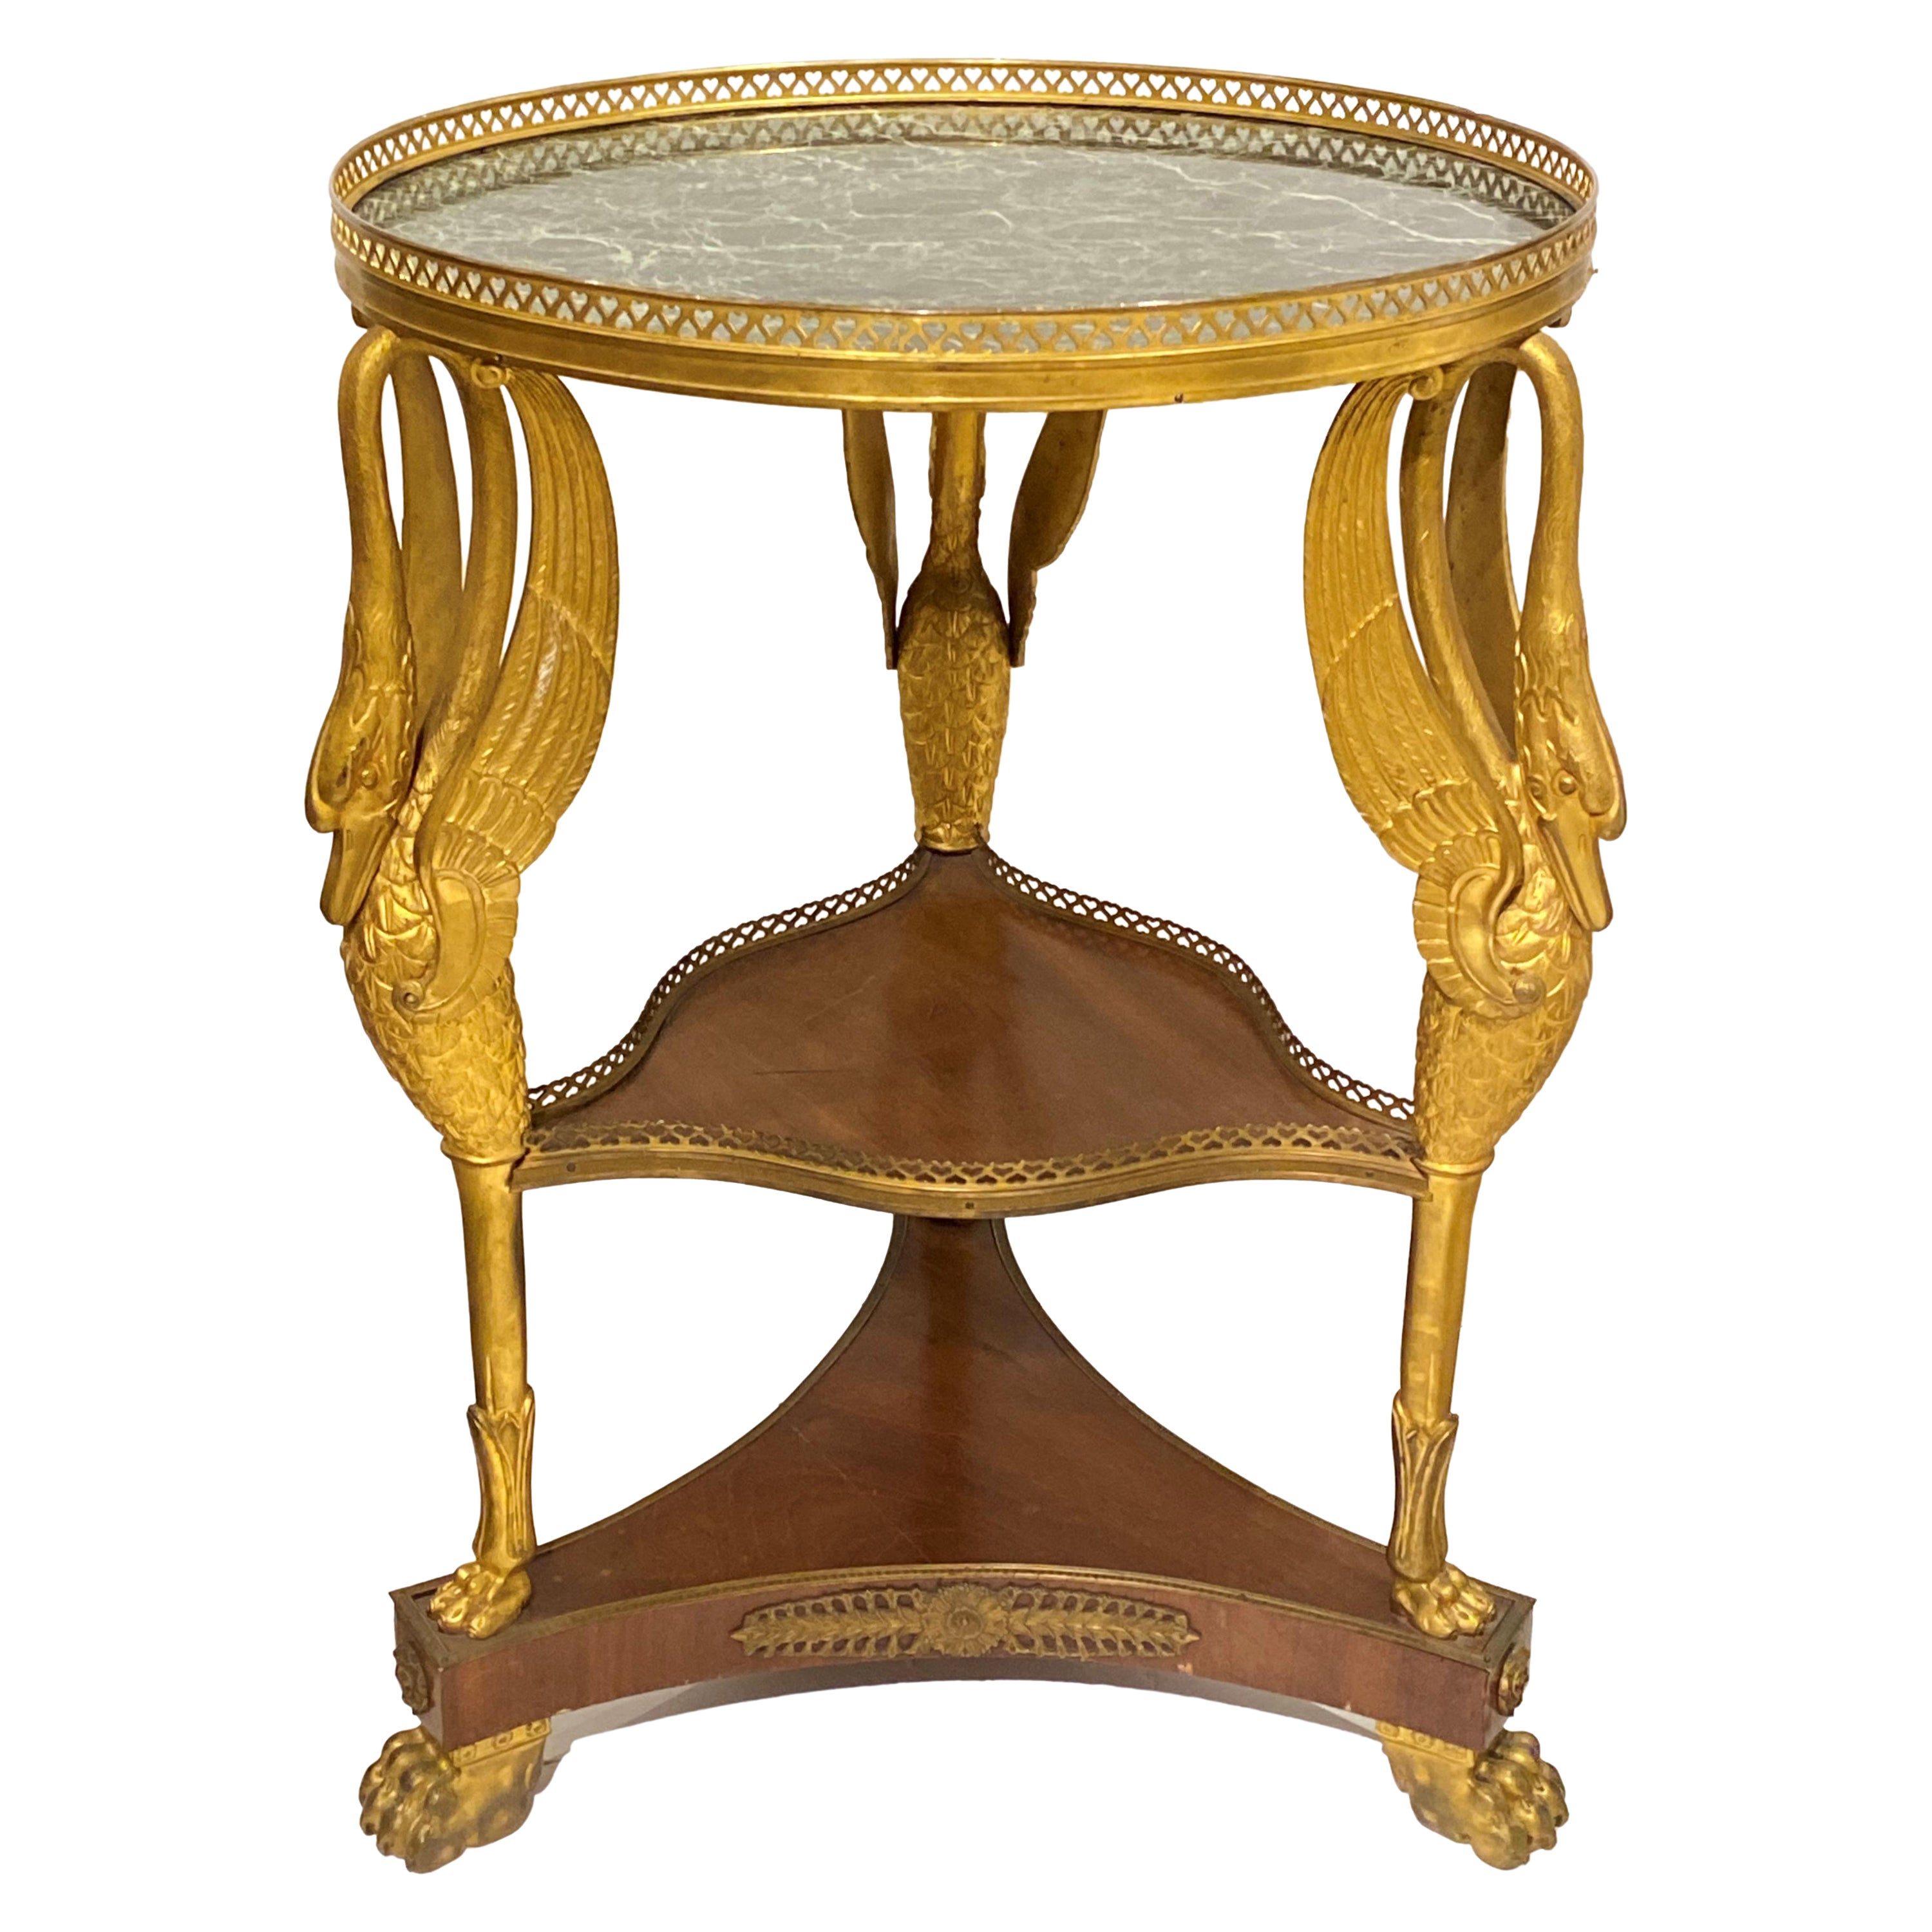 French Empire Style Gilt Bronze and Mahogany Marble-Top Gueridon Table